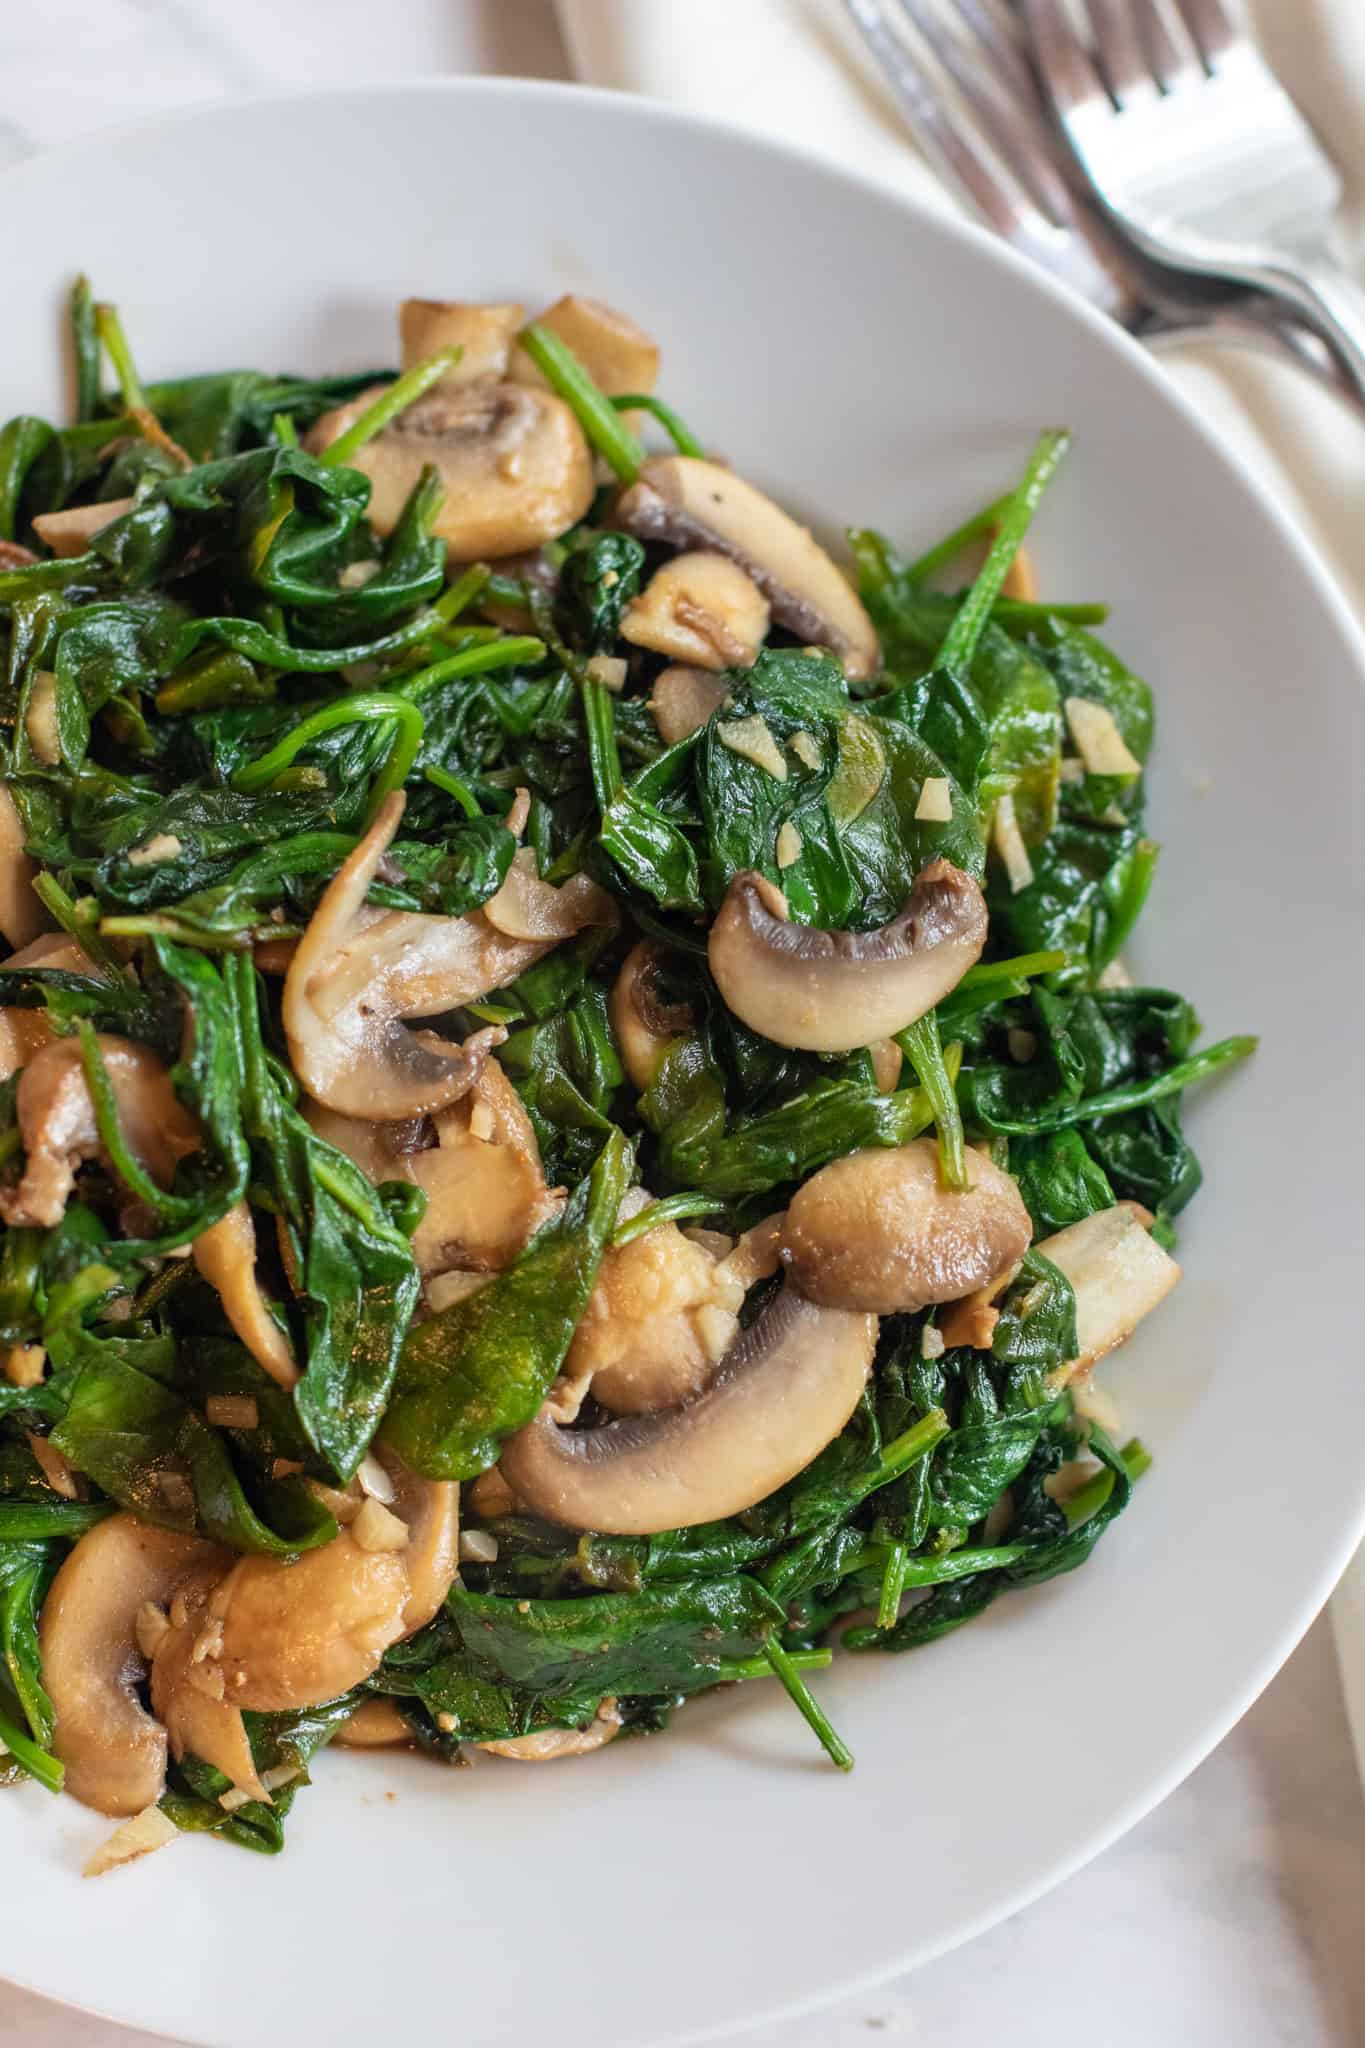 Balsamic Spinach And Mushrooms Served From Scratch,Hillshire Farms Smoked Sausage Recipes